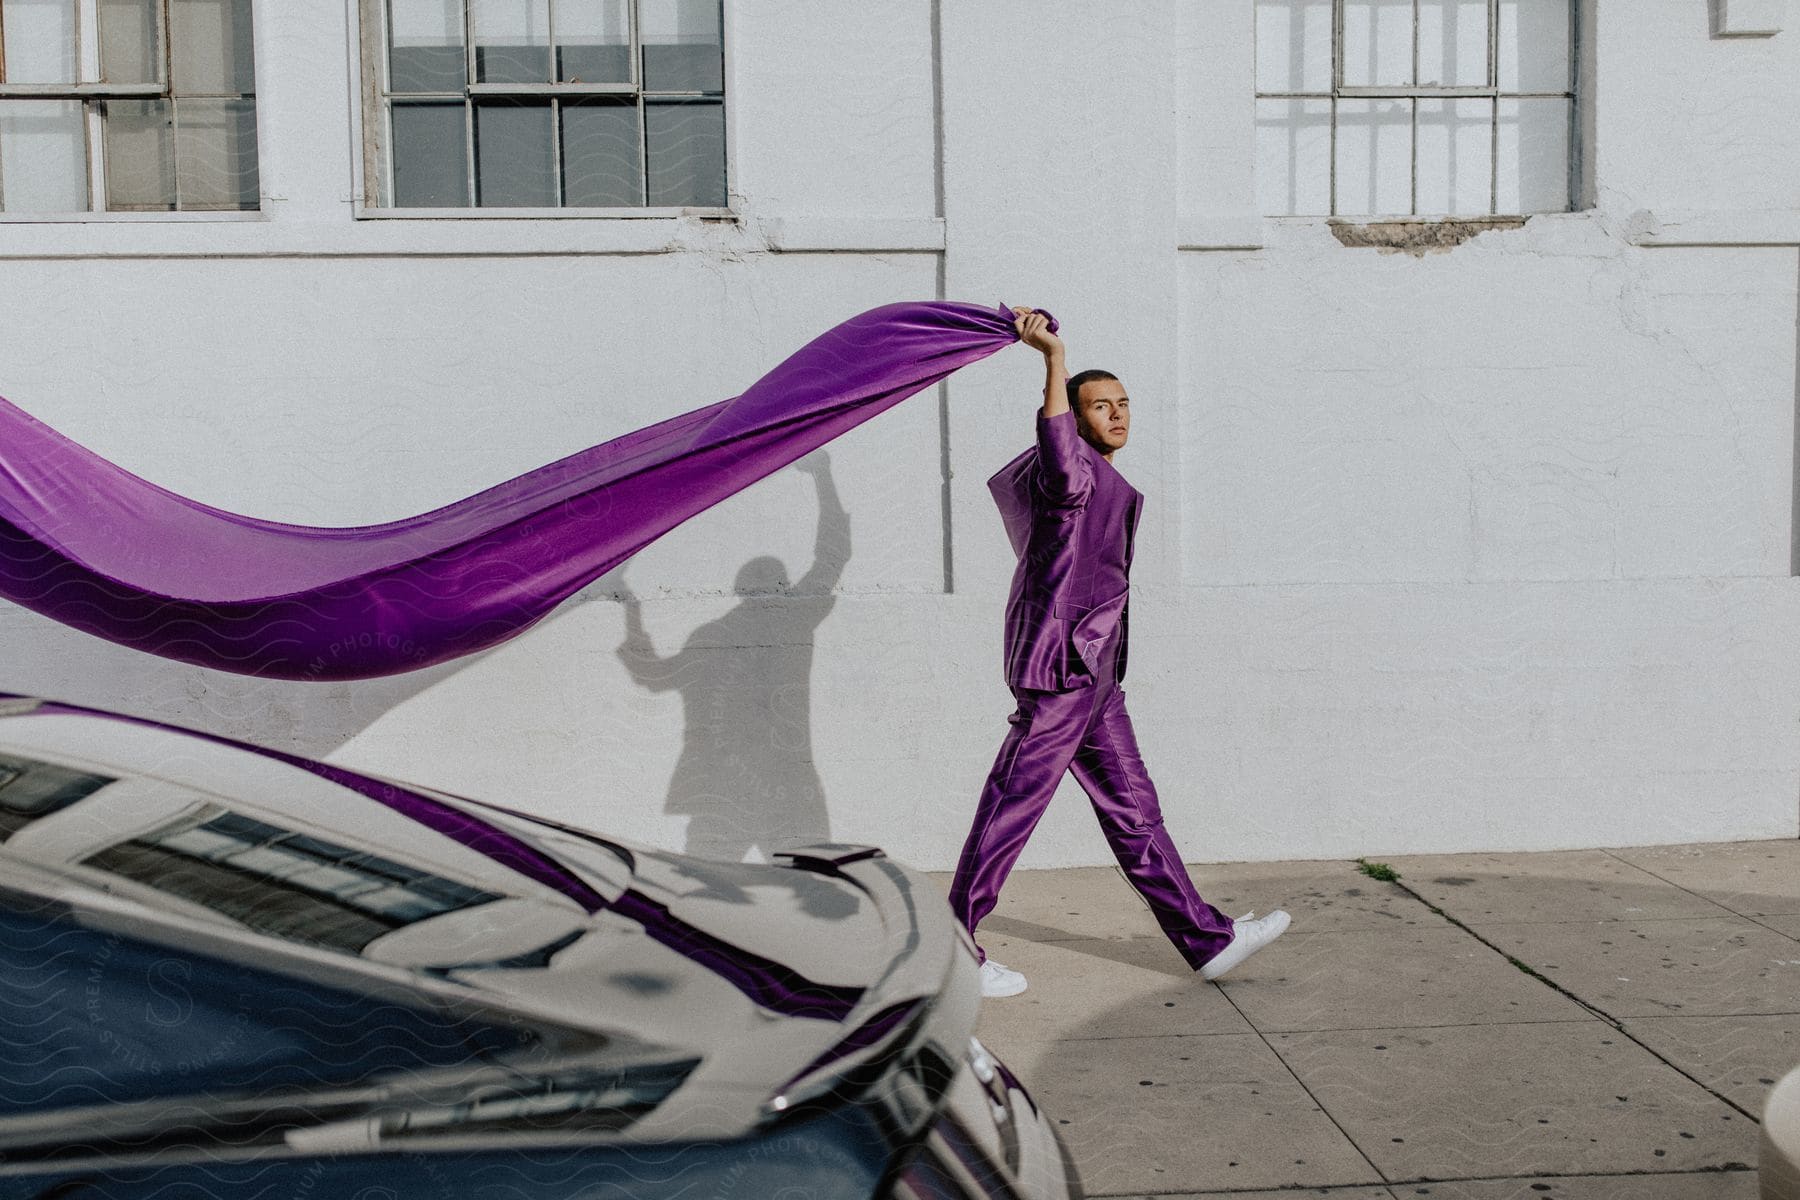 A person in neutral clothing stands in front of a purple car in the city